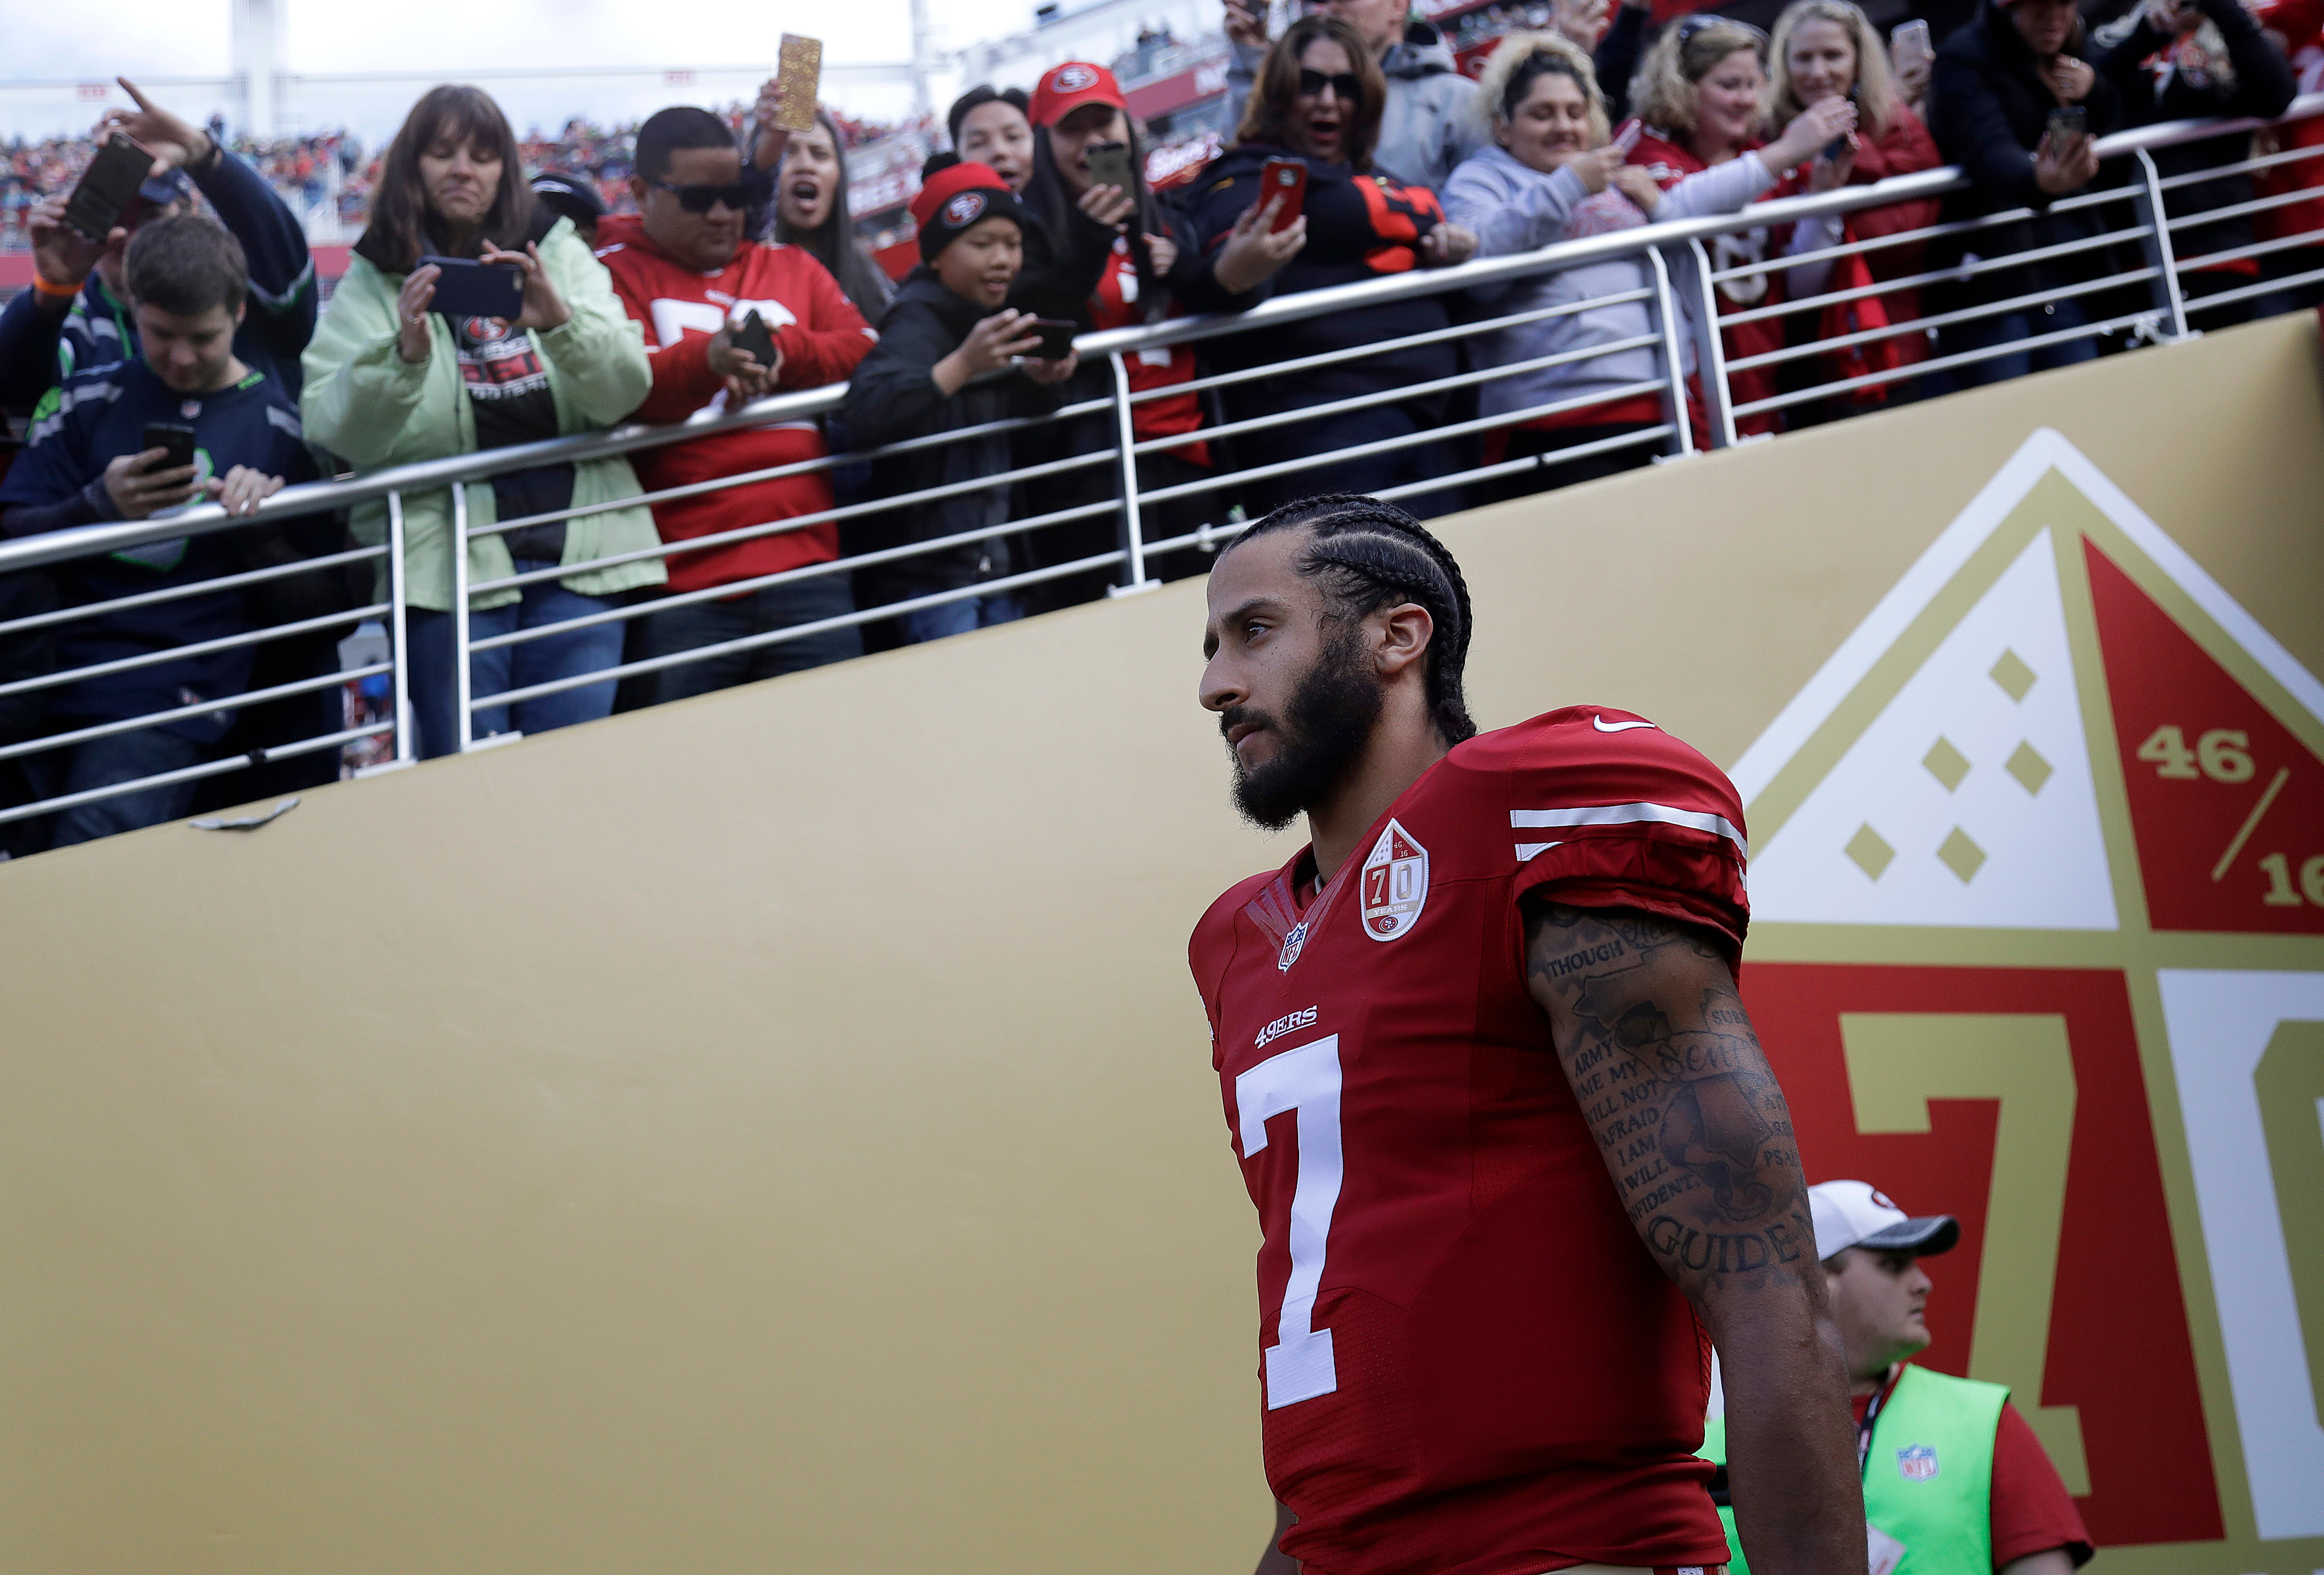 Colin Kaepernick Nike Deal: How Much It Could Be Worth | Money